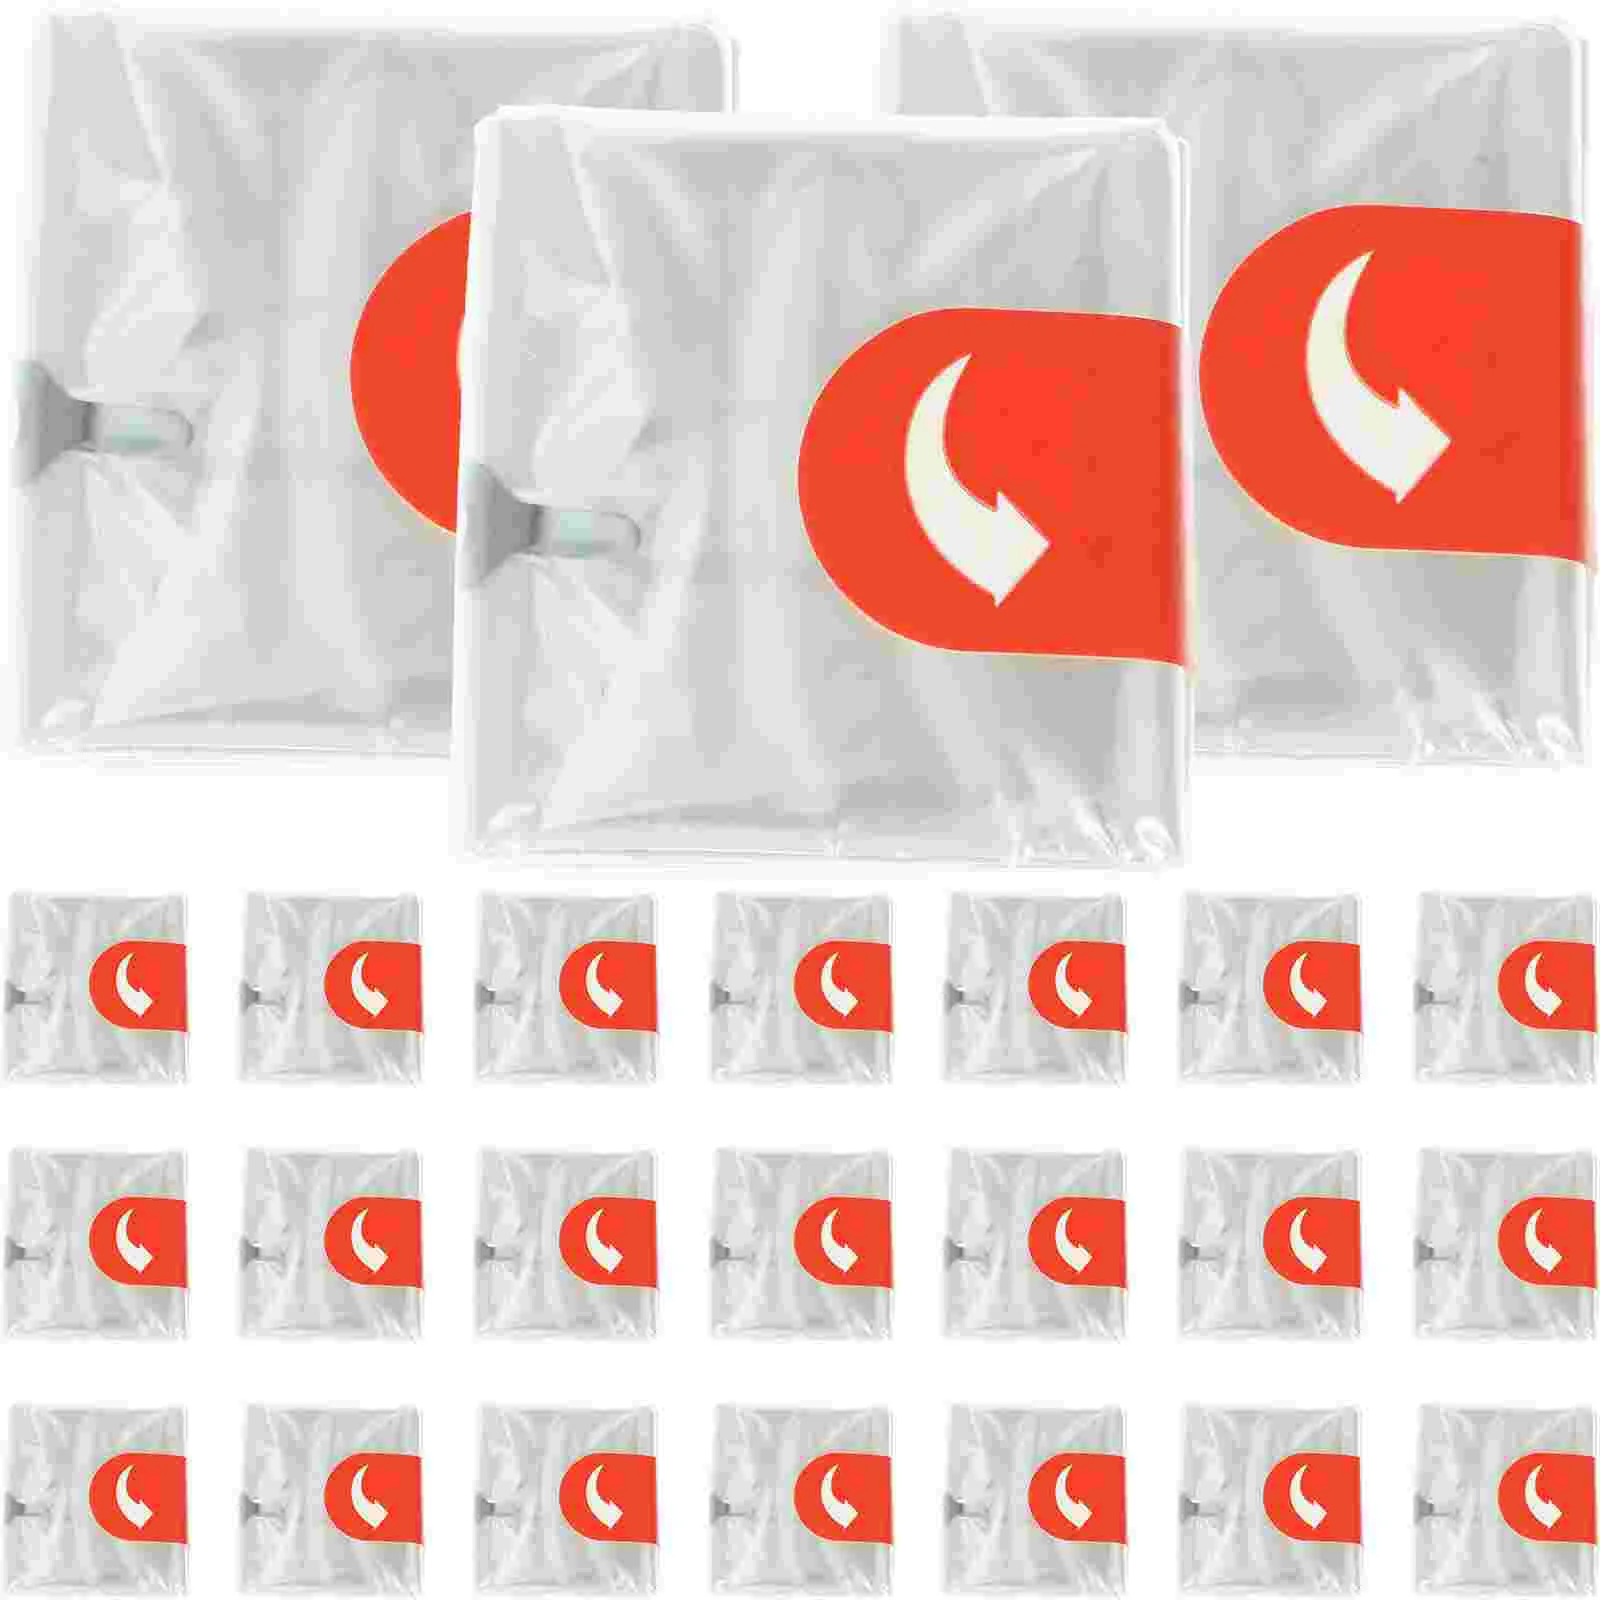 

50pcs Oven Bags Turkey Roasting Bags Oven Cooking Roasting Bags for Chicken Meat Ham Seafood Vegetable White Türkiye duty free